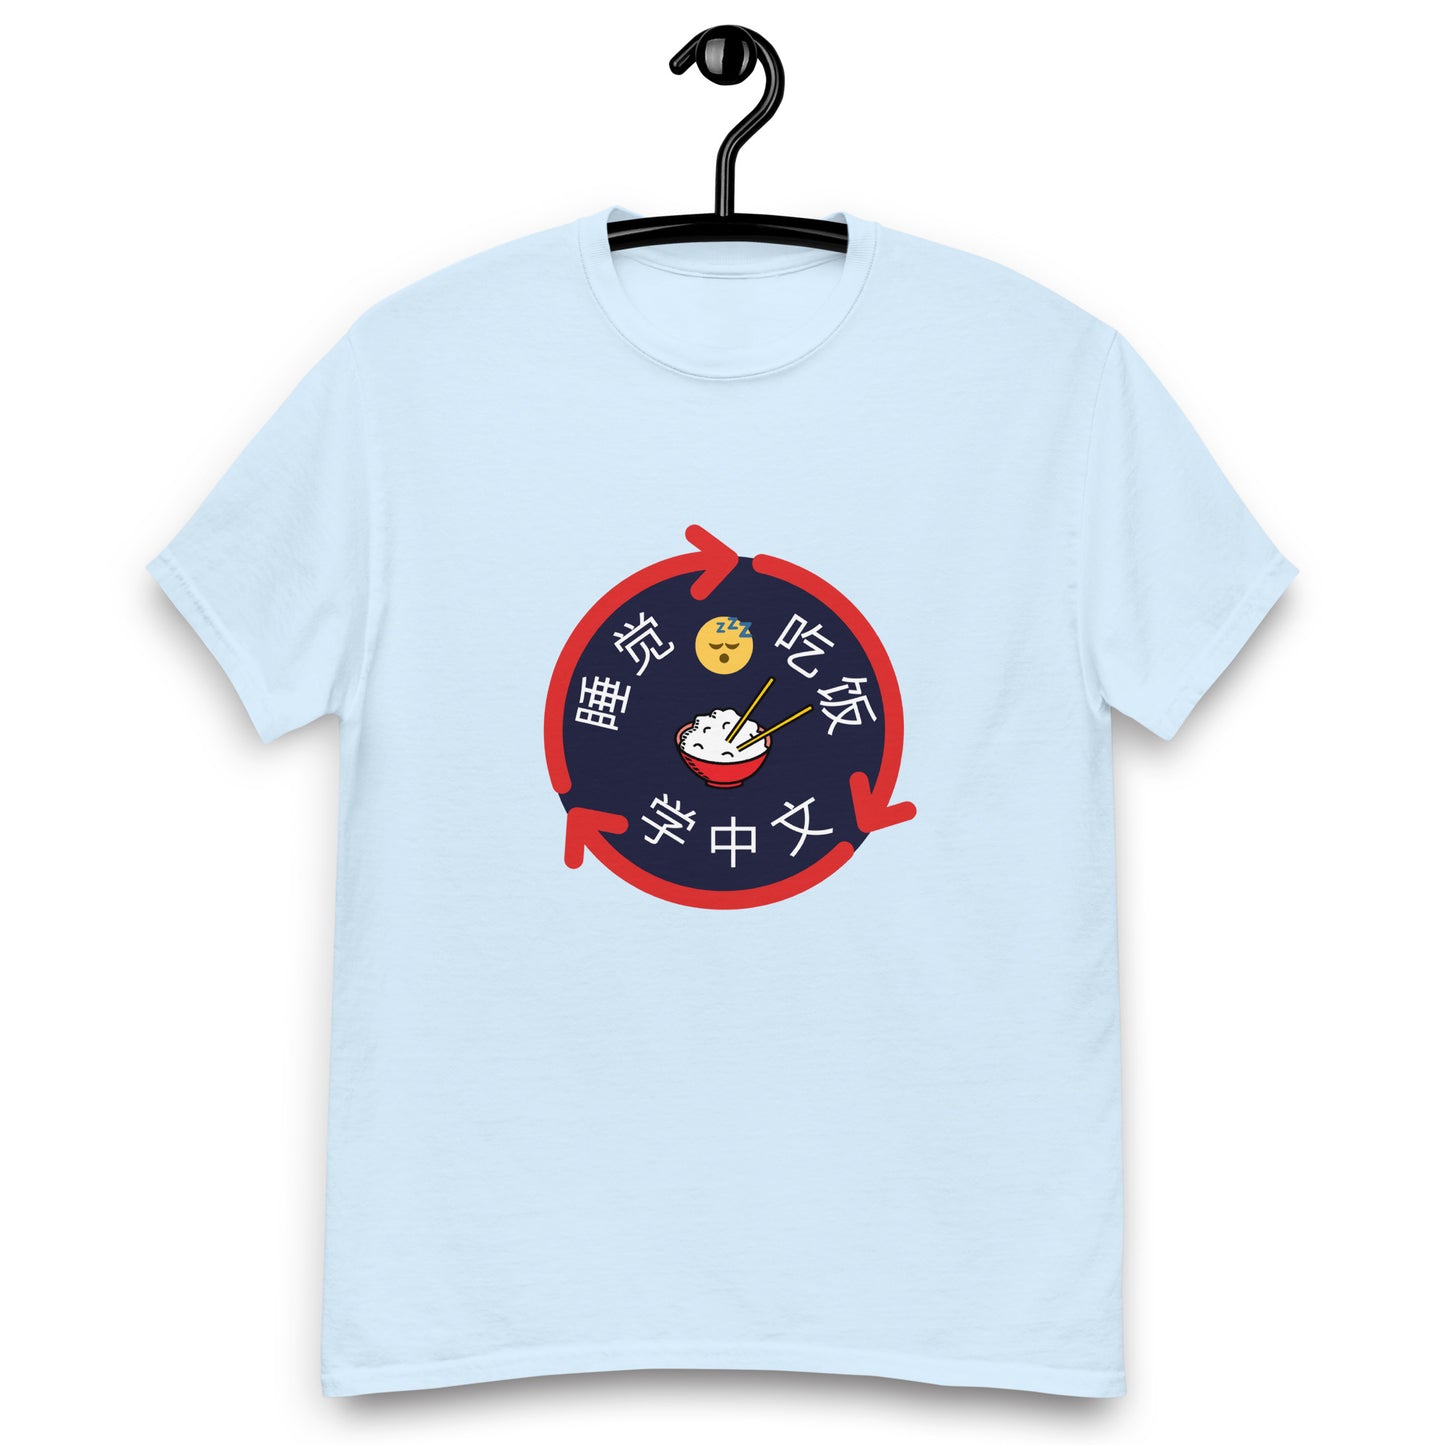 Mandarin Chinese Characters T-shirt, Funny, Humorous writing, Teacher Approved, 吃饭睡觉学中文，eat sleep learn Chinese and repeat